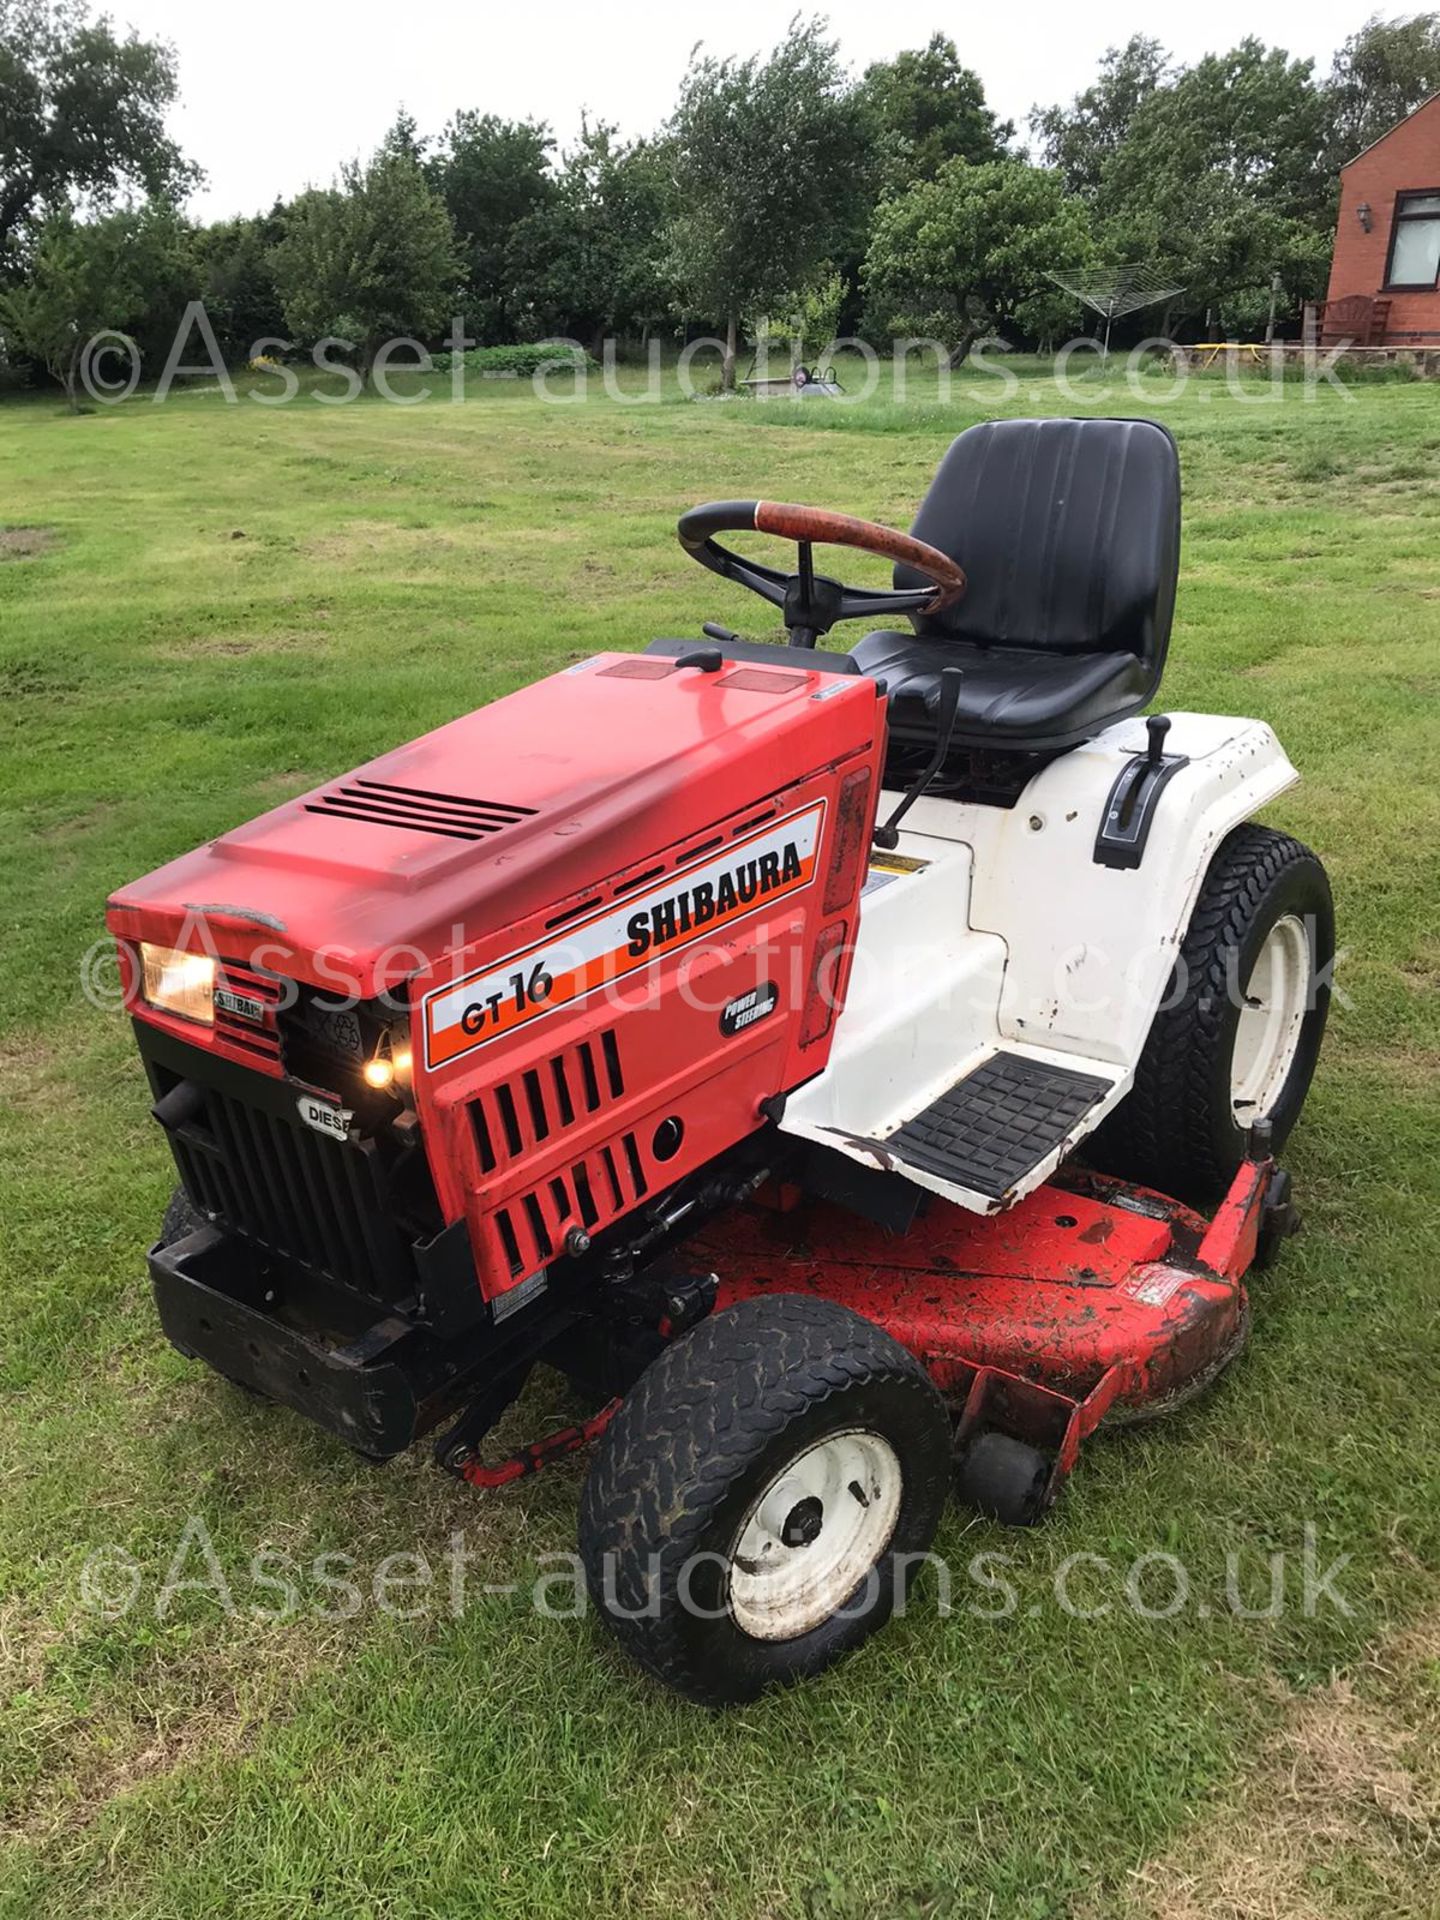 SHIBAURA GT16 RIDE ON LAWN MOWER, RUNS, DRIVES AND CUTS, HYDROSTATIC DRIVE, DIESEL ENGINE *NO VAT* - Image 3 of 10